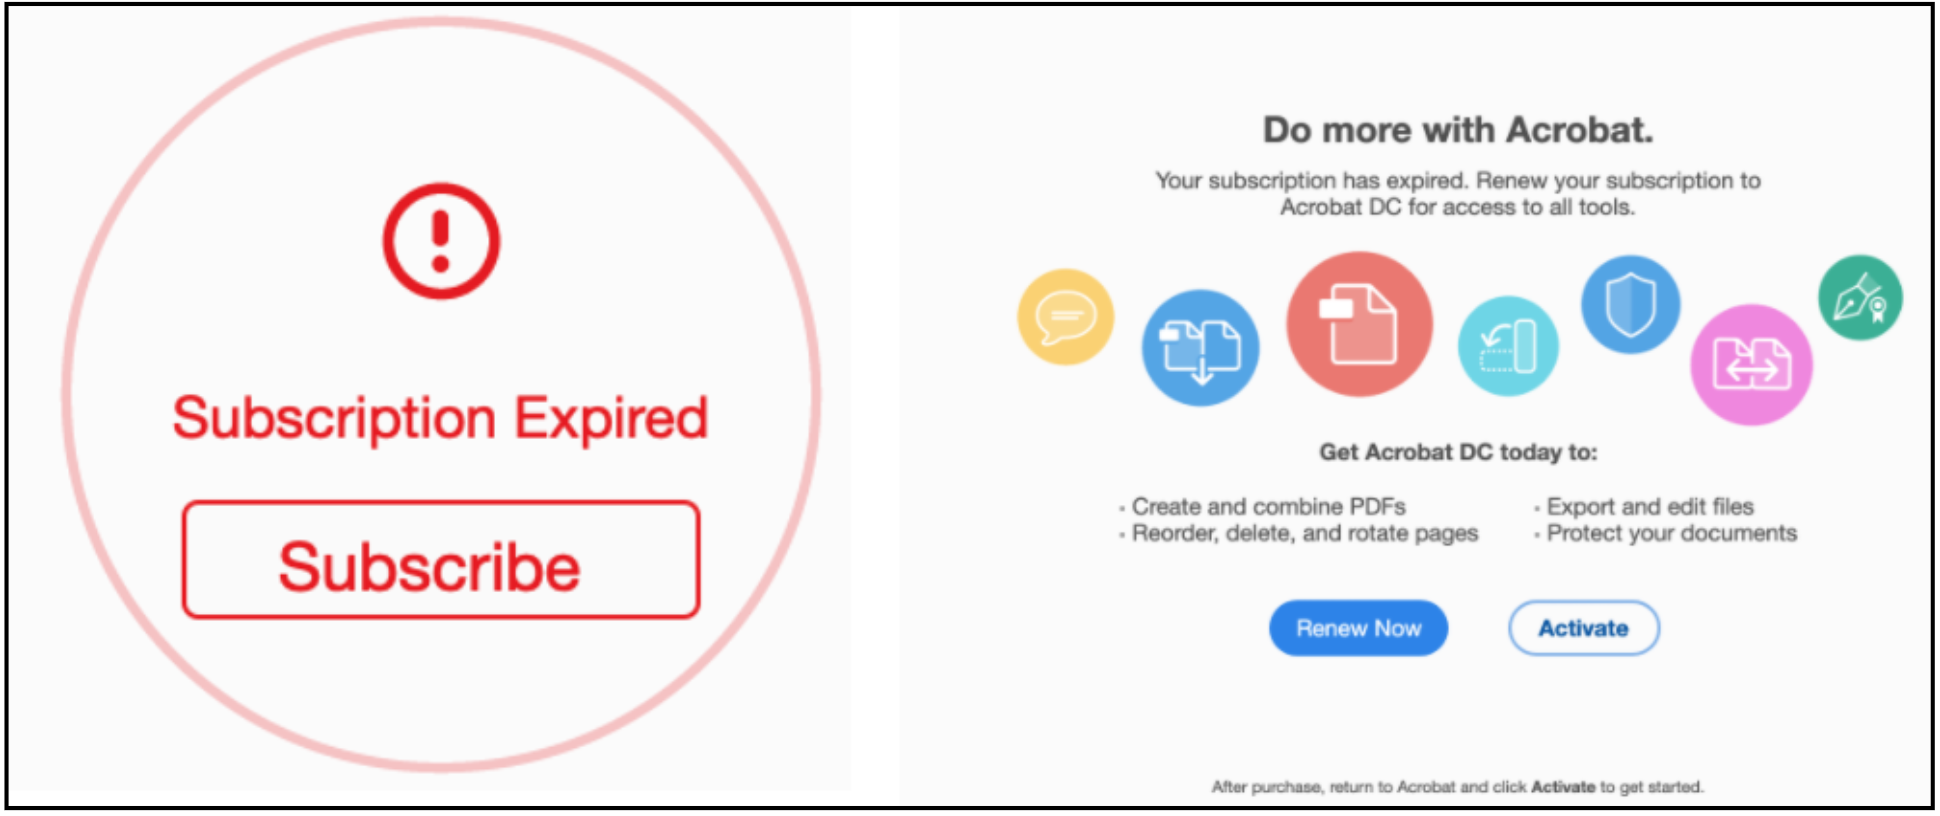 The Adobe screen displays a red circle highlighting a subscription expired message. On the right, the user is presented with the options to either renew their subscription or activate a new one. 